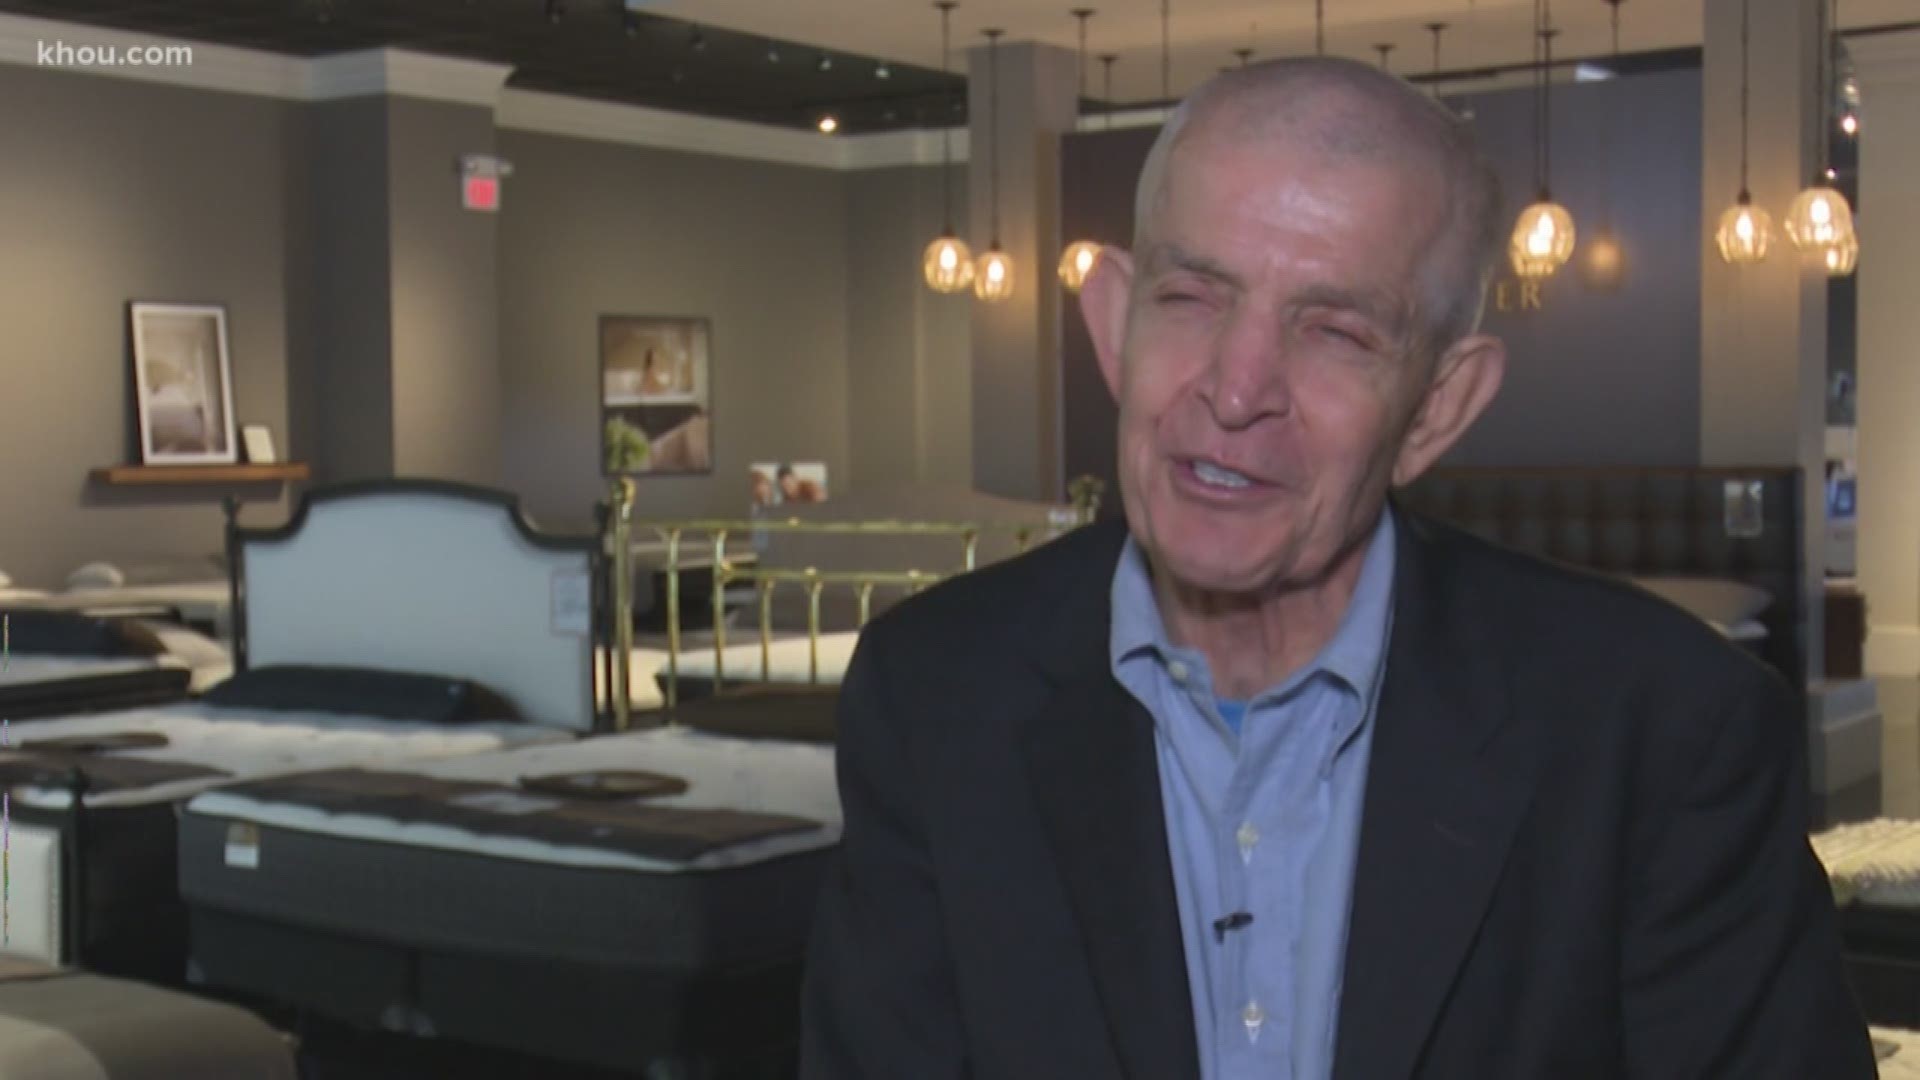 This year, Mattress Mack got insurance to back up his bet after giving away more than $12 million in mattress money last year.